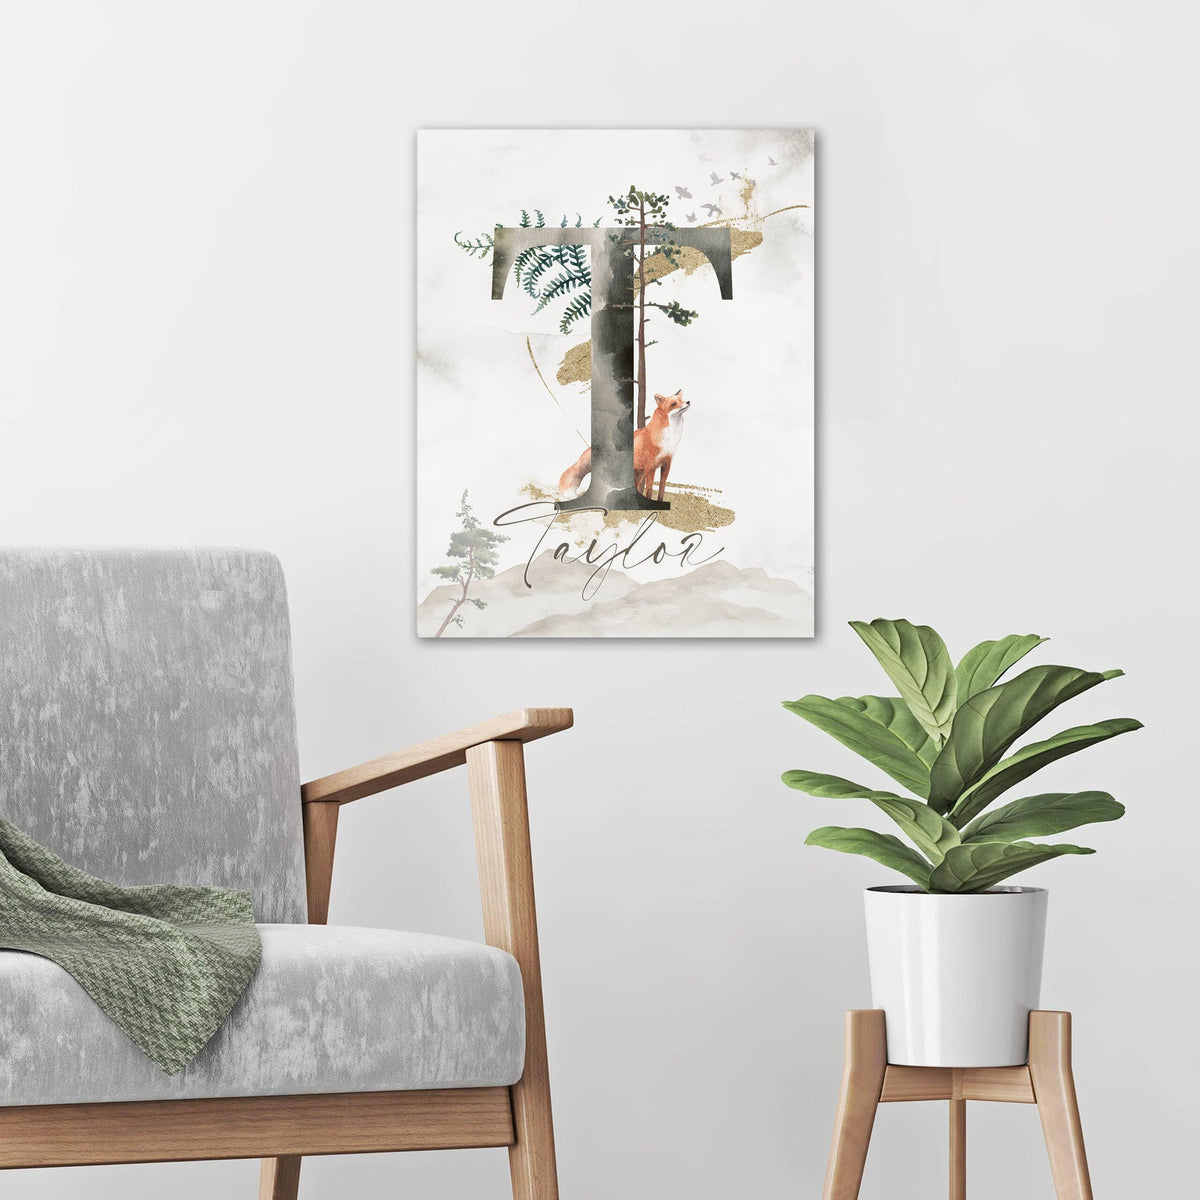 Woodland decor personalized art from Personal Prints